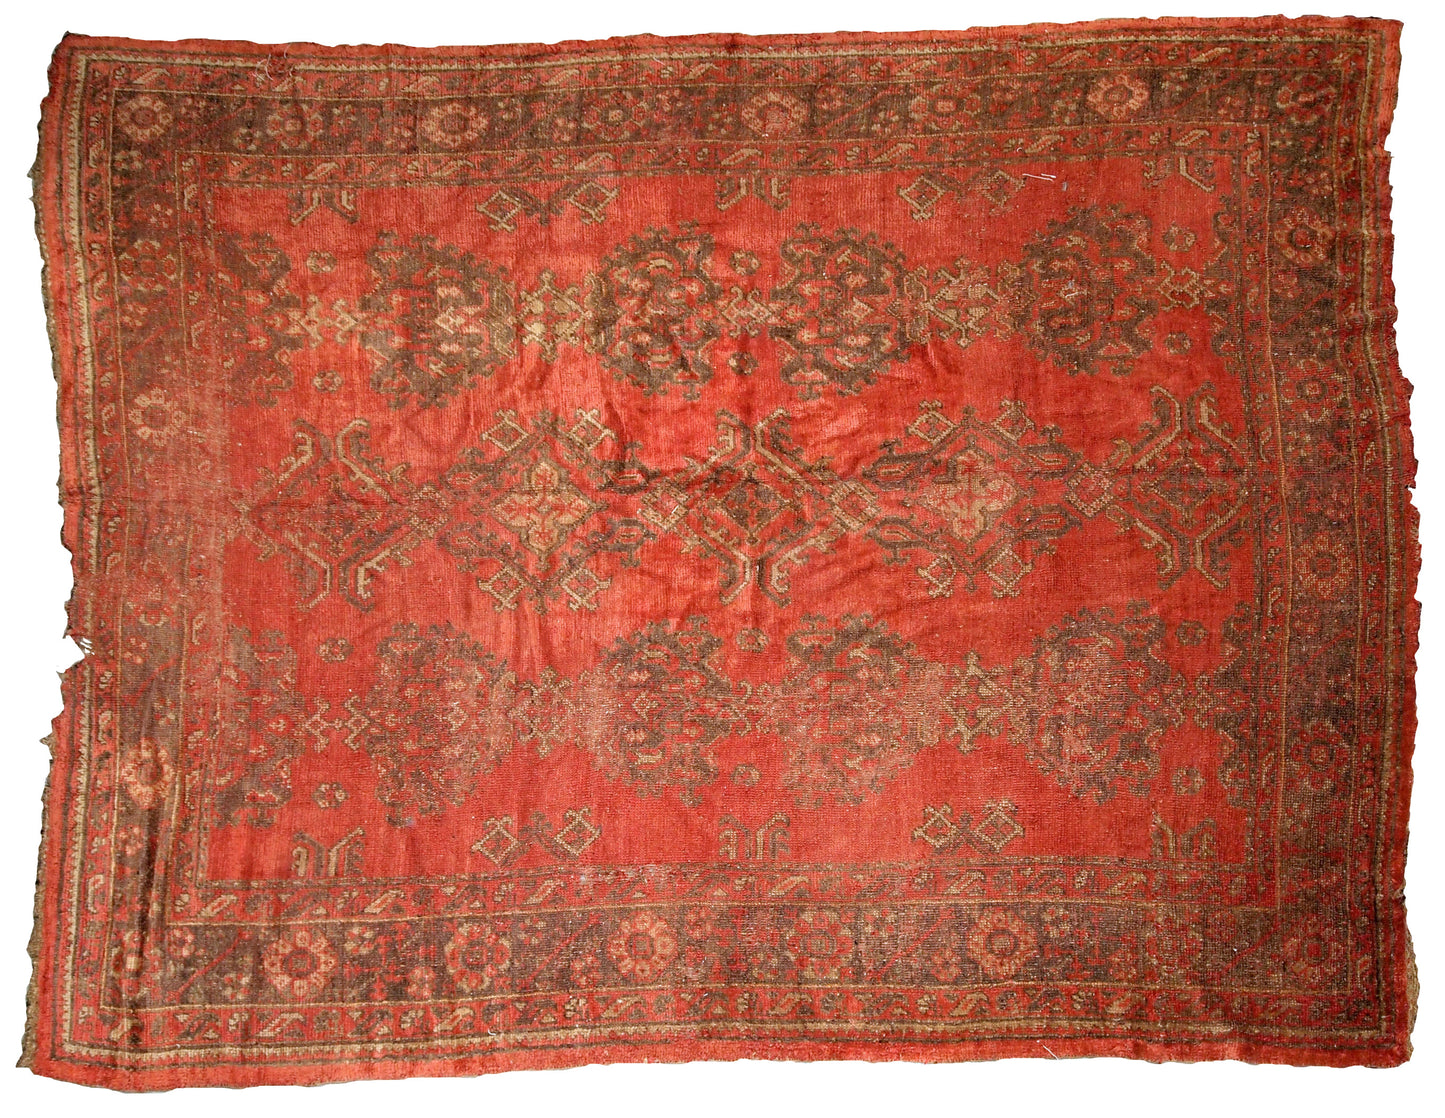 Antique handmade Turkish rug in orange color. The rug is from the beginning of 20th century in original condition, it has some signs of age.